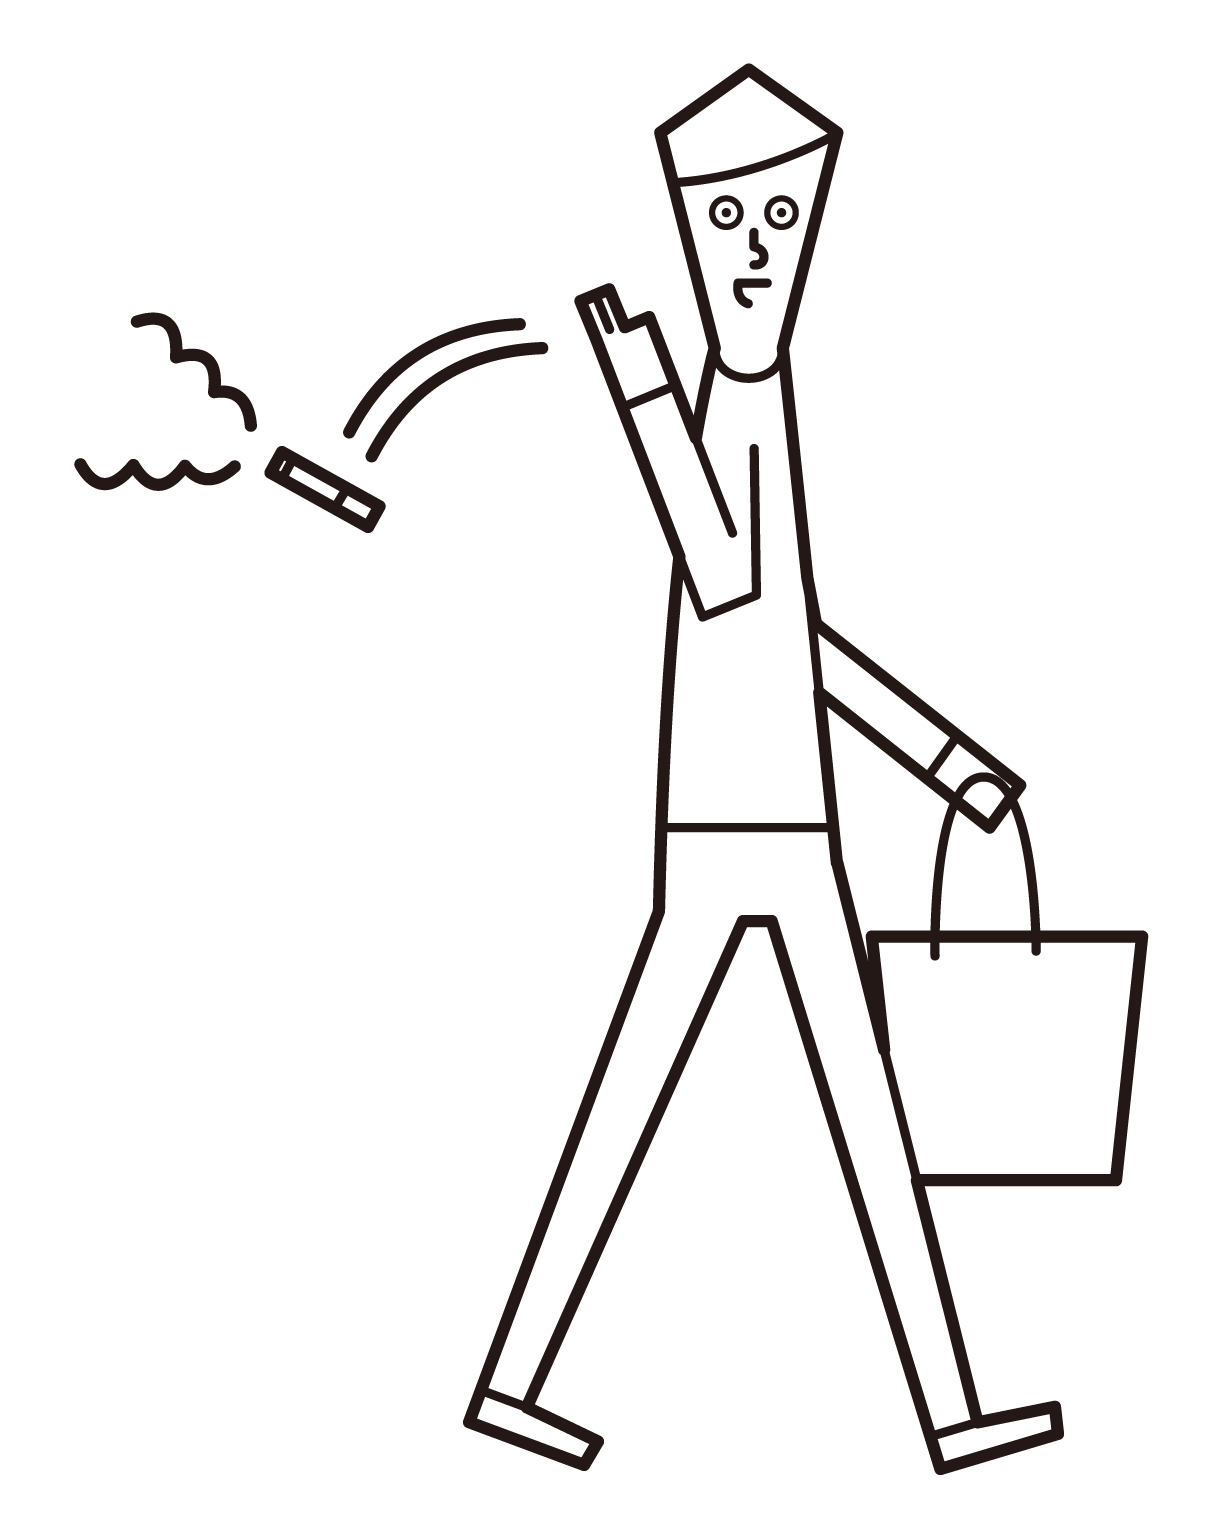 Illustration of a man throwing a cigarette on the street